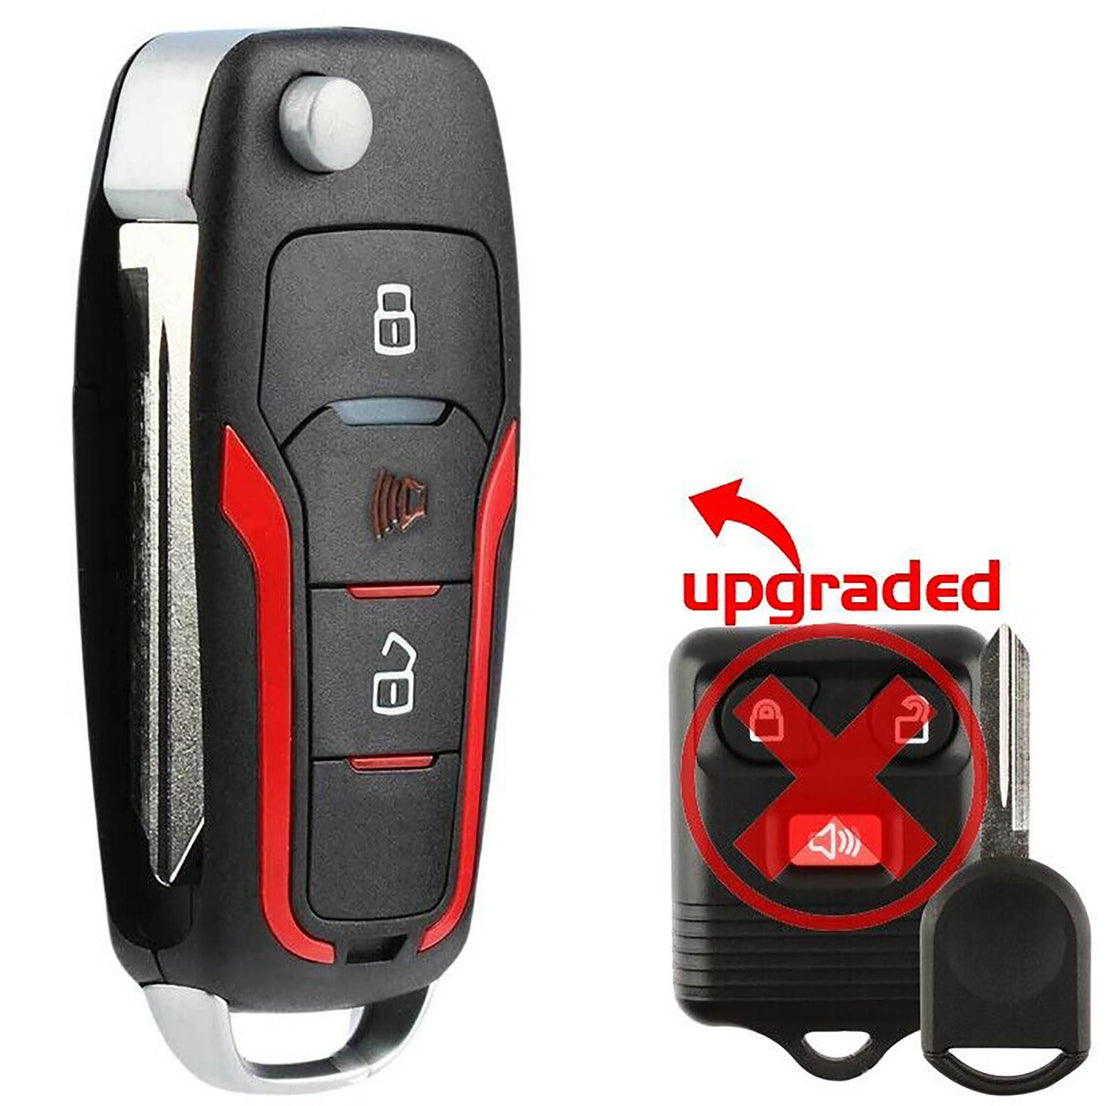 1x New Replacement Keyless Remote Key Fob Compatible with & Fit For Ford Lincoln Mazda Mercury 80 chip - MPN CWTWB1U345-02